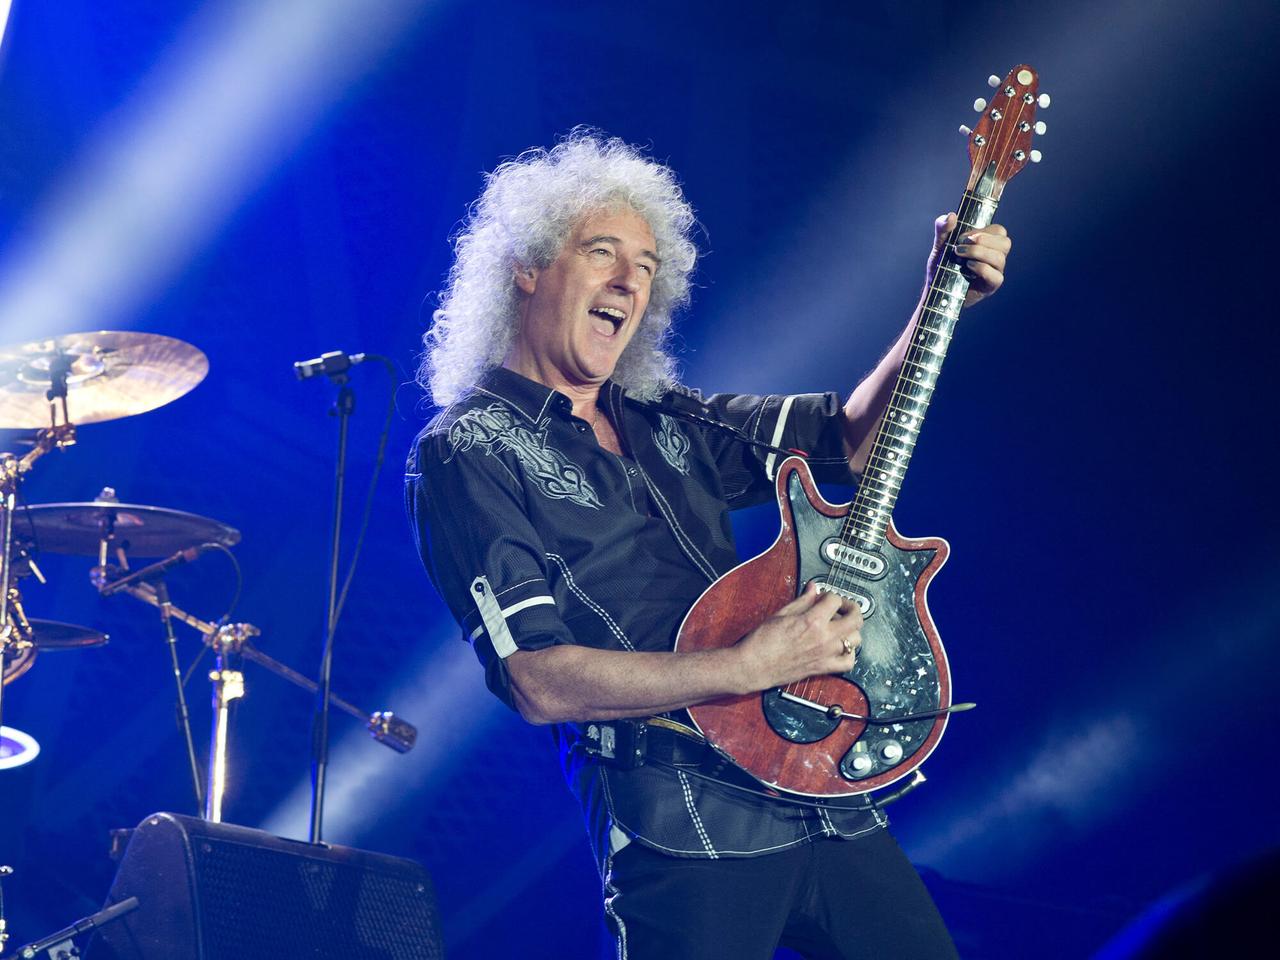 We Will Rock You may help cells release insulin, but Brian May isn't happy